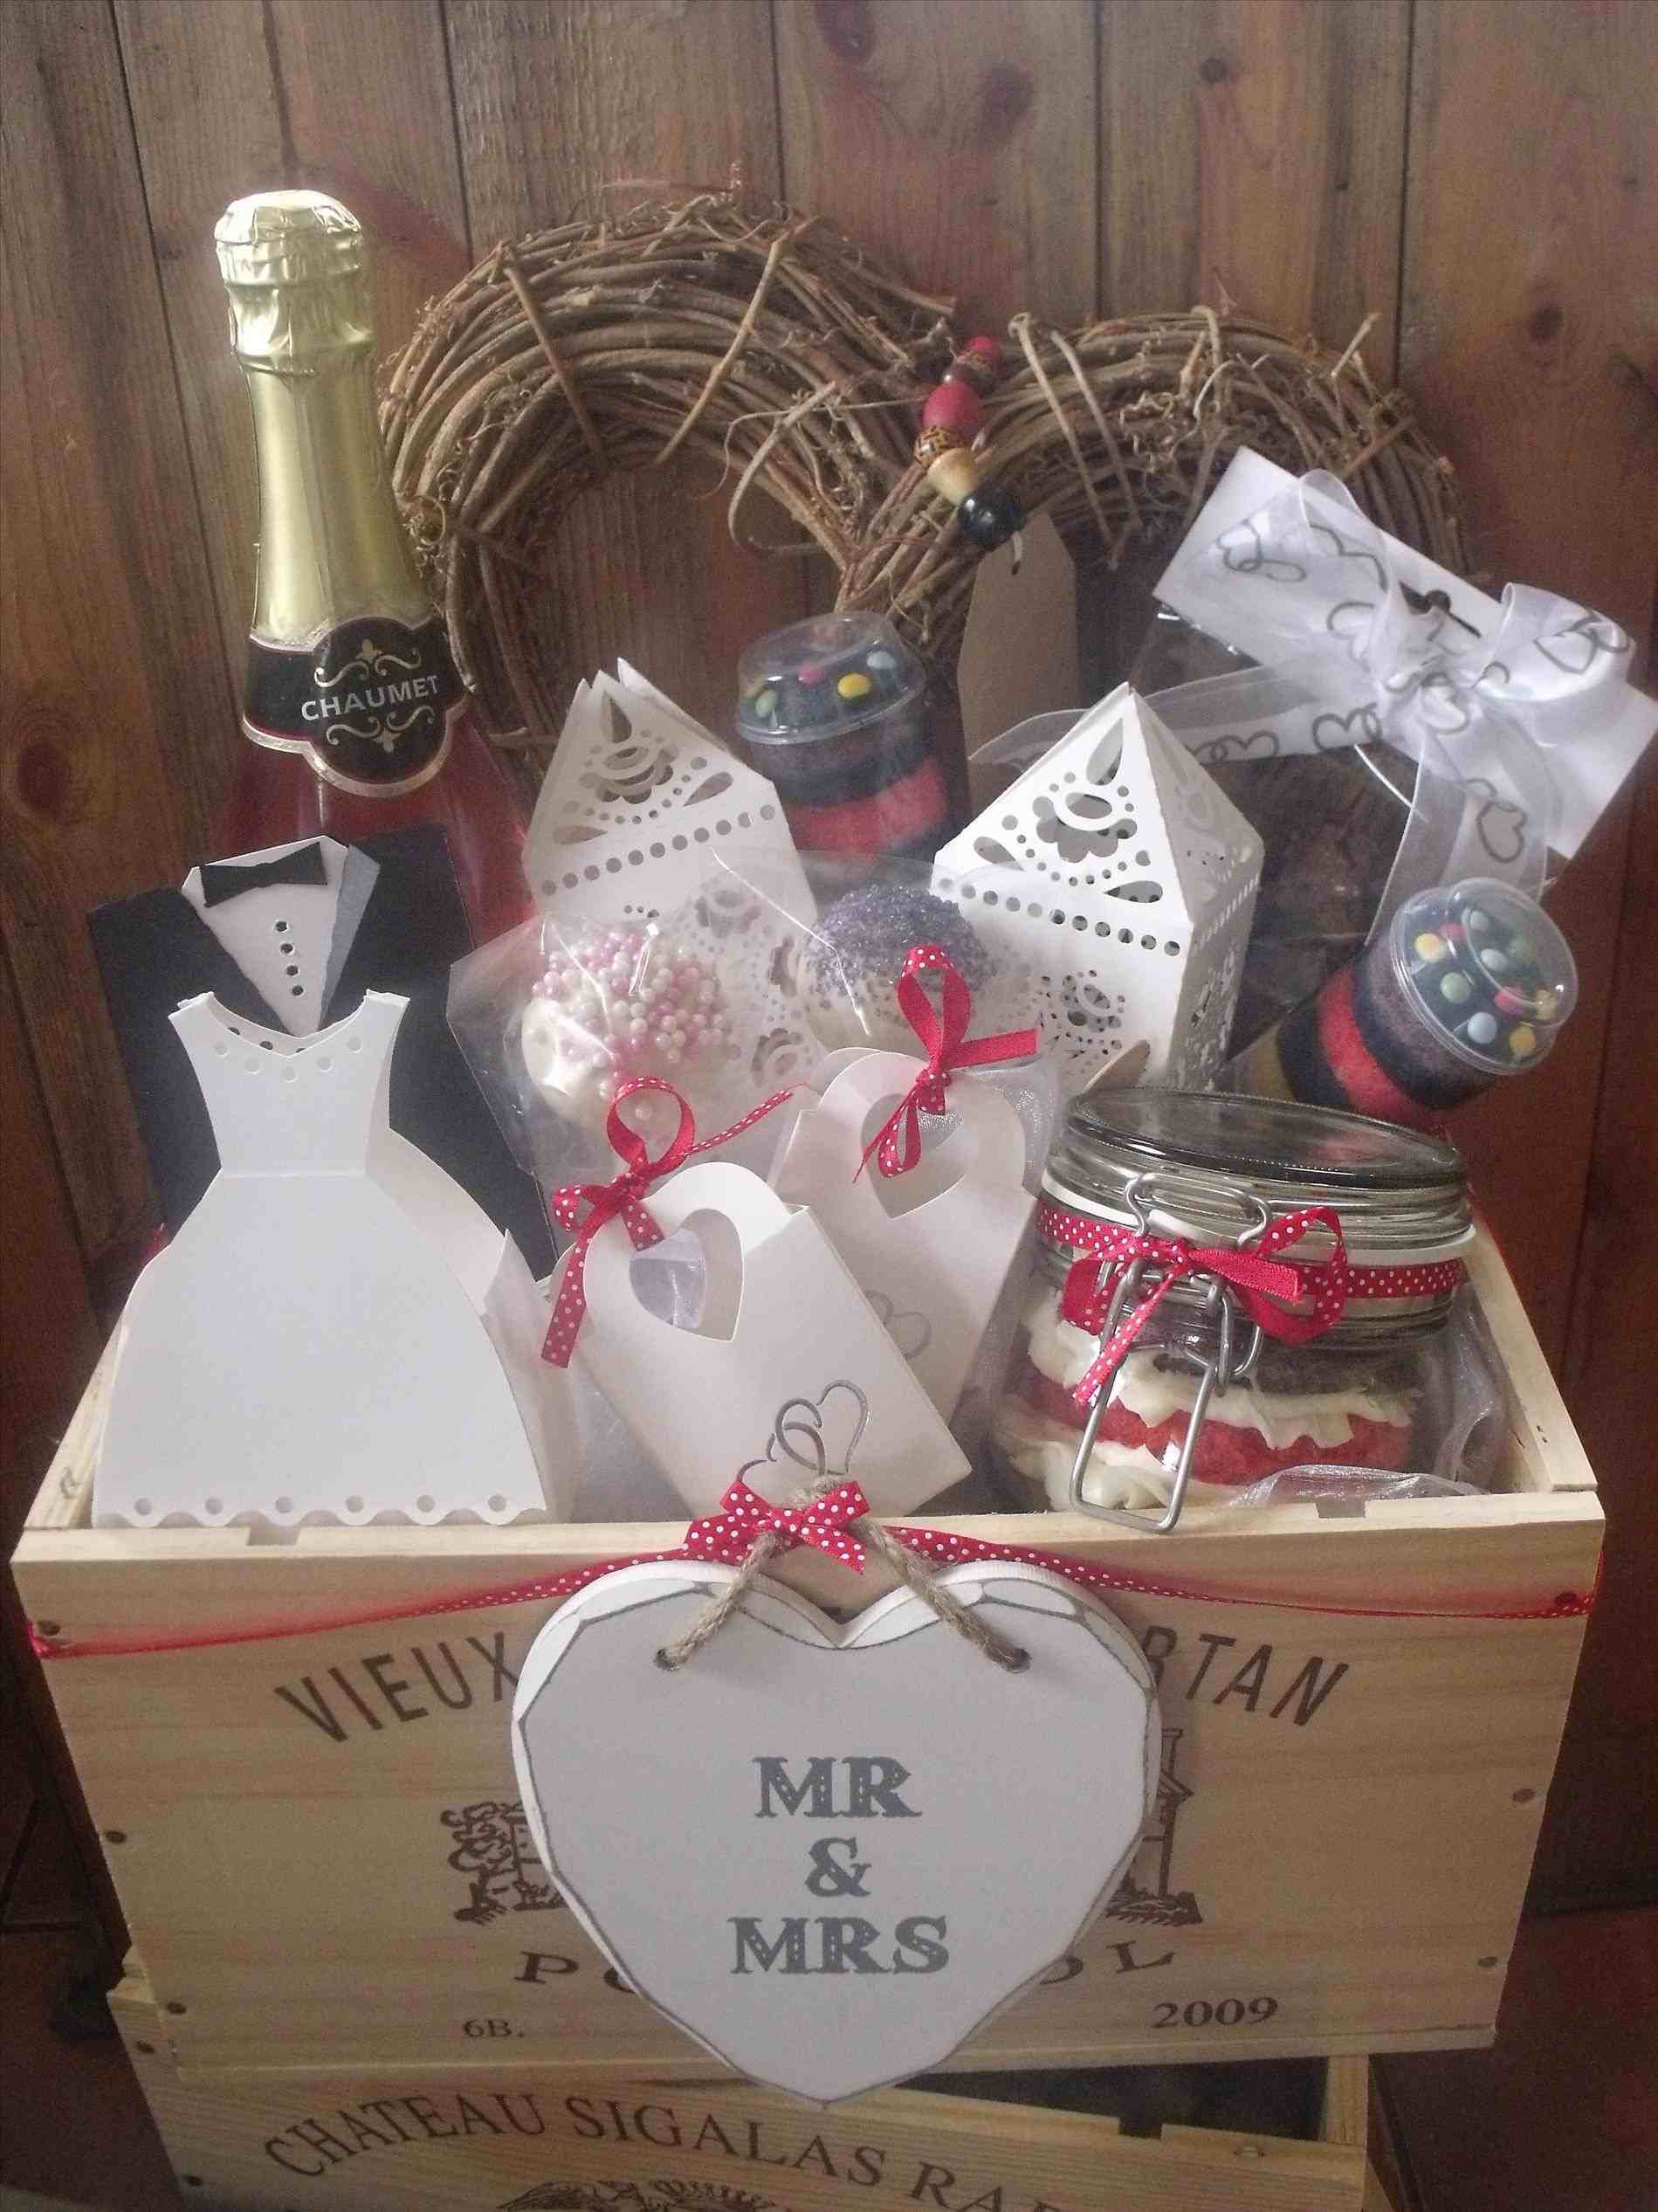 Homemade Wedding Gift Basket Ideas
 More About homemade wedding t basket ideas Update